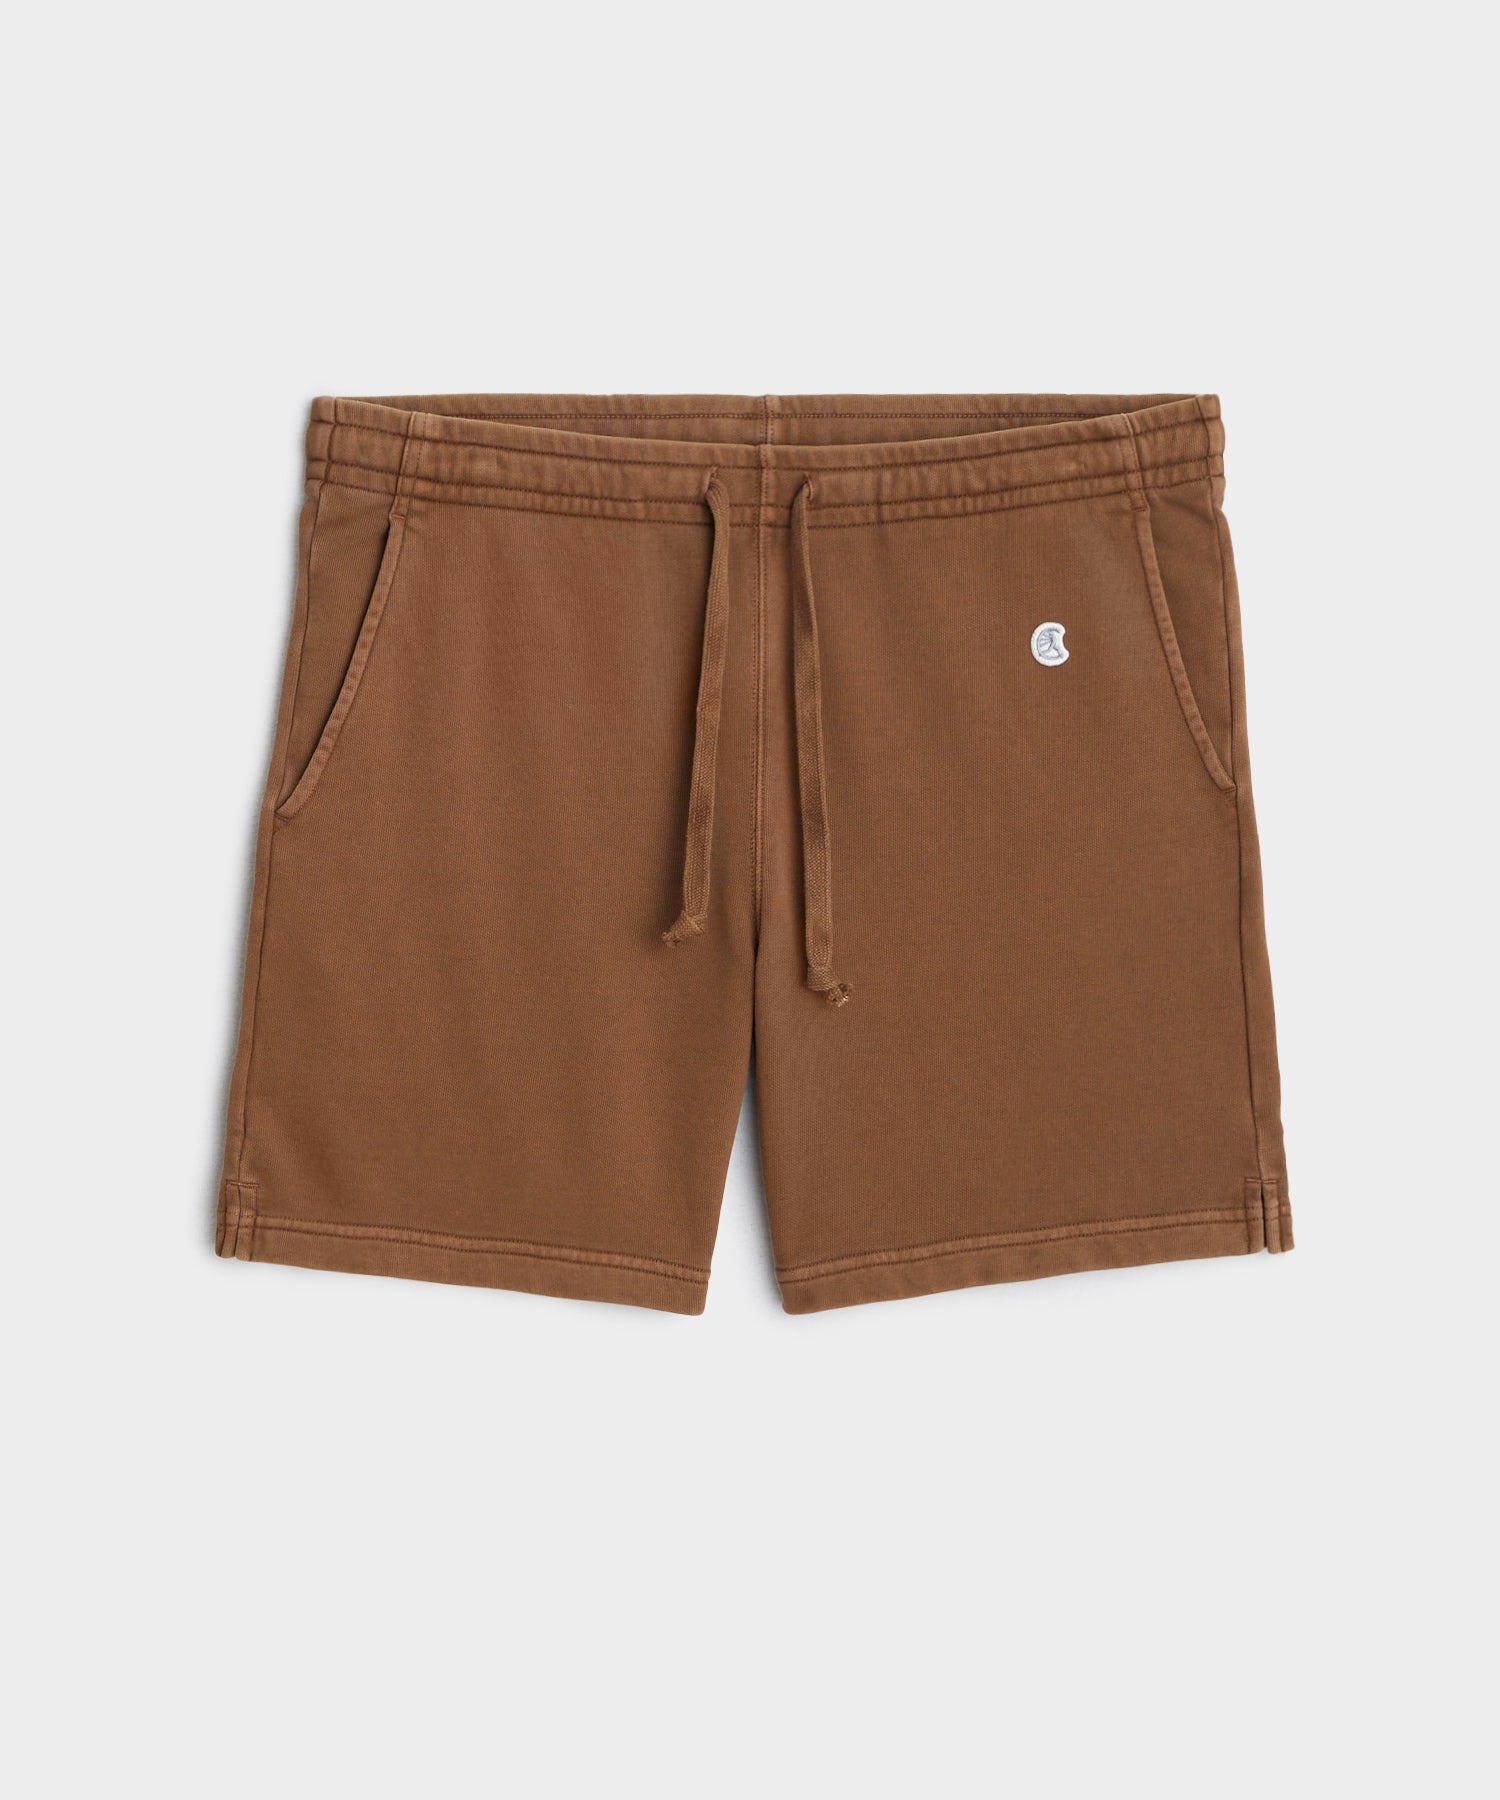 7" Midweight Warm Up Short in Glazed Pecan